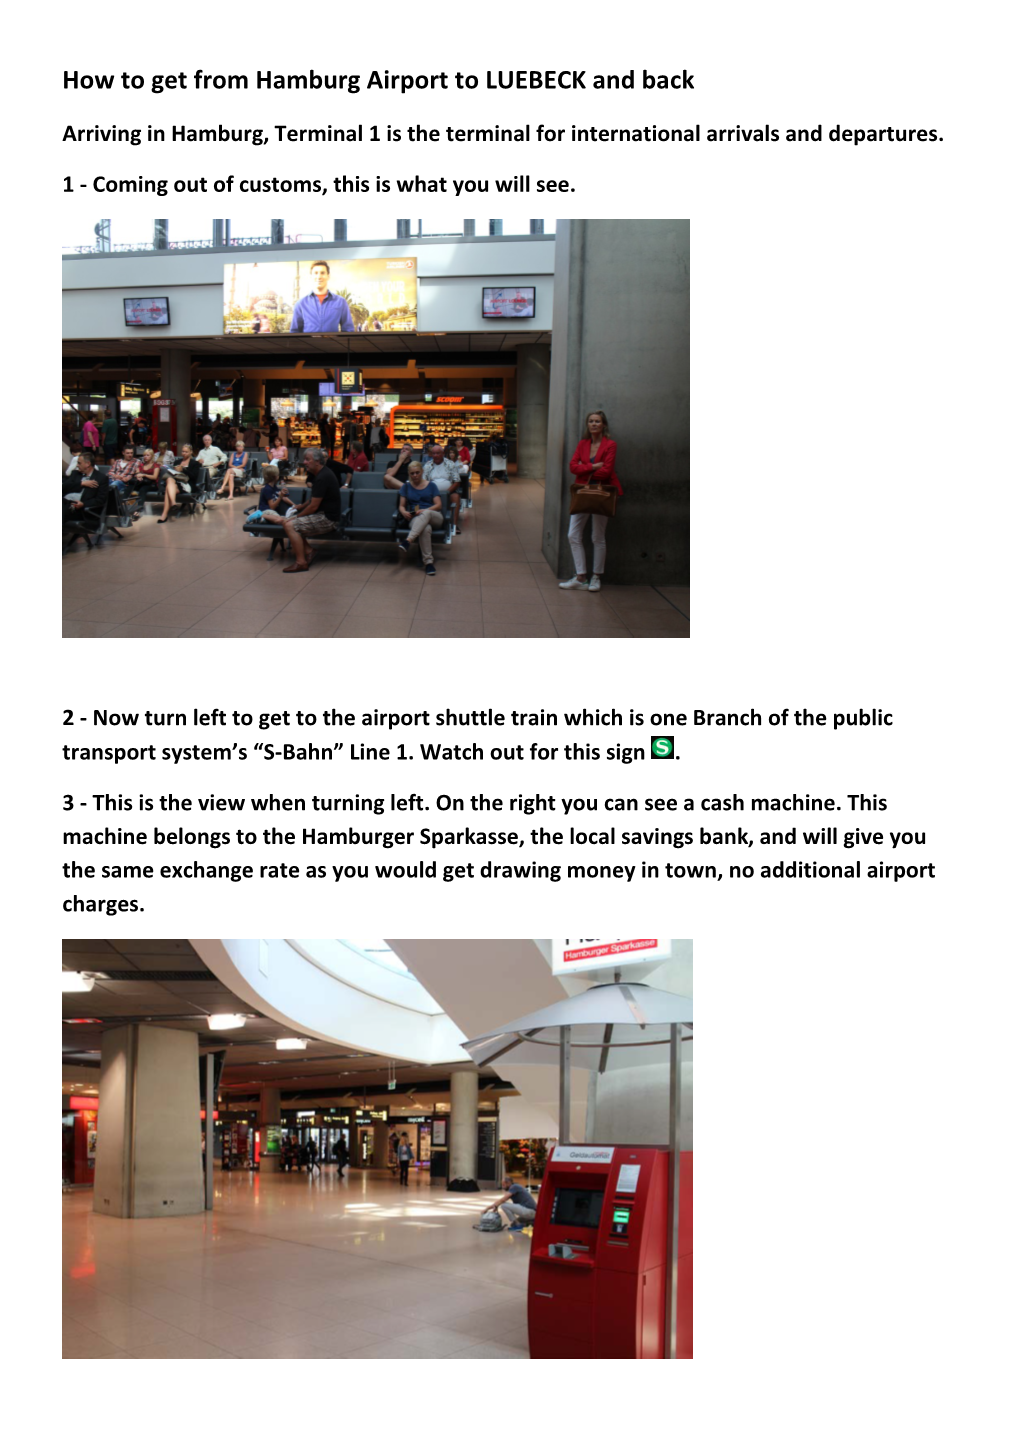 How to Get from Hamburg Airport to LUEBECK and Back